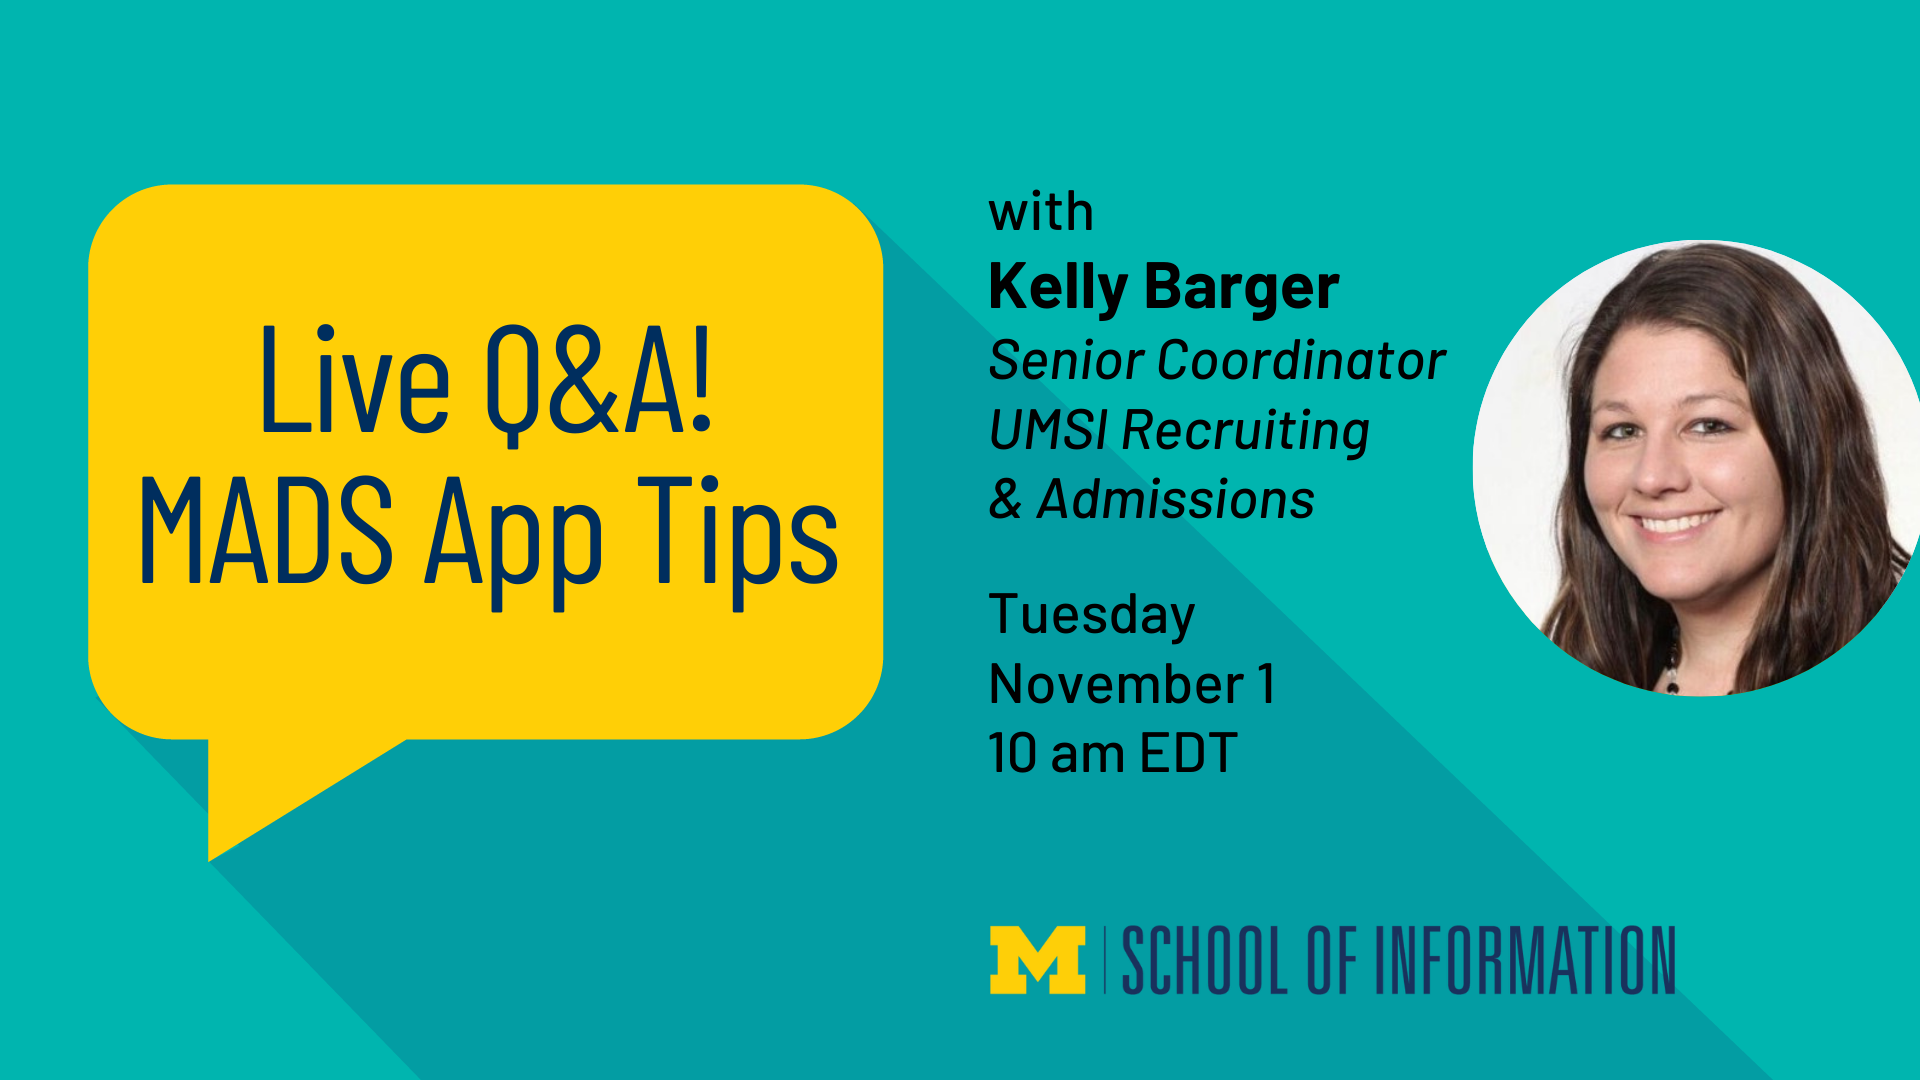 "Live Q&A! MADS App Tips with Kelly Barger, Senior Coordinator, UMSI Recruiting & Admissions. Tuesday, November 1. 10 am EDT."